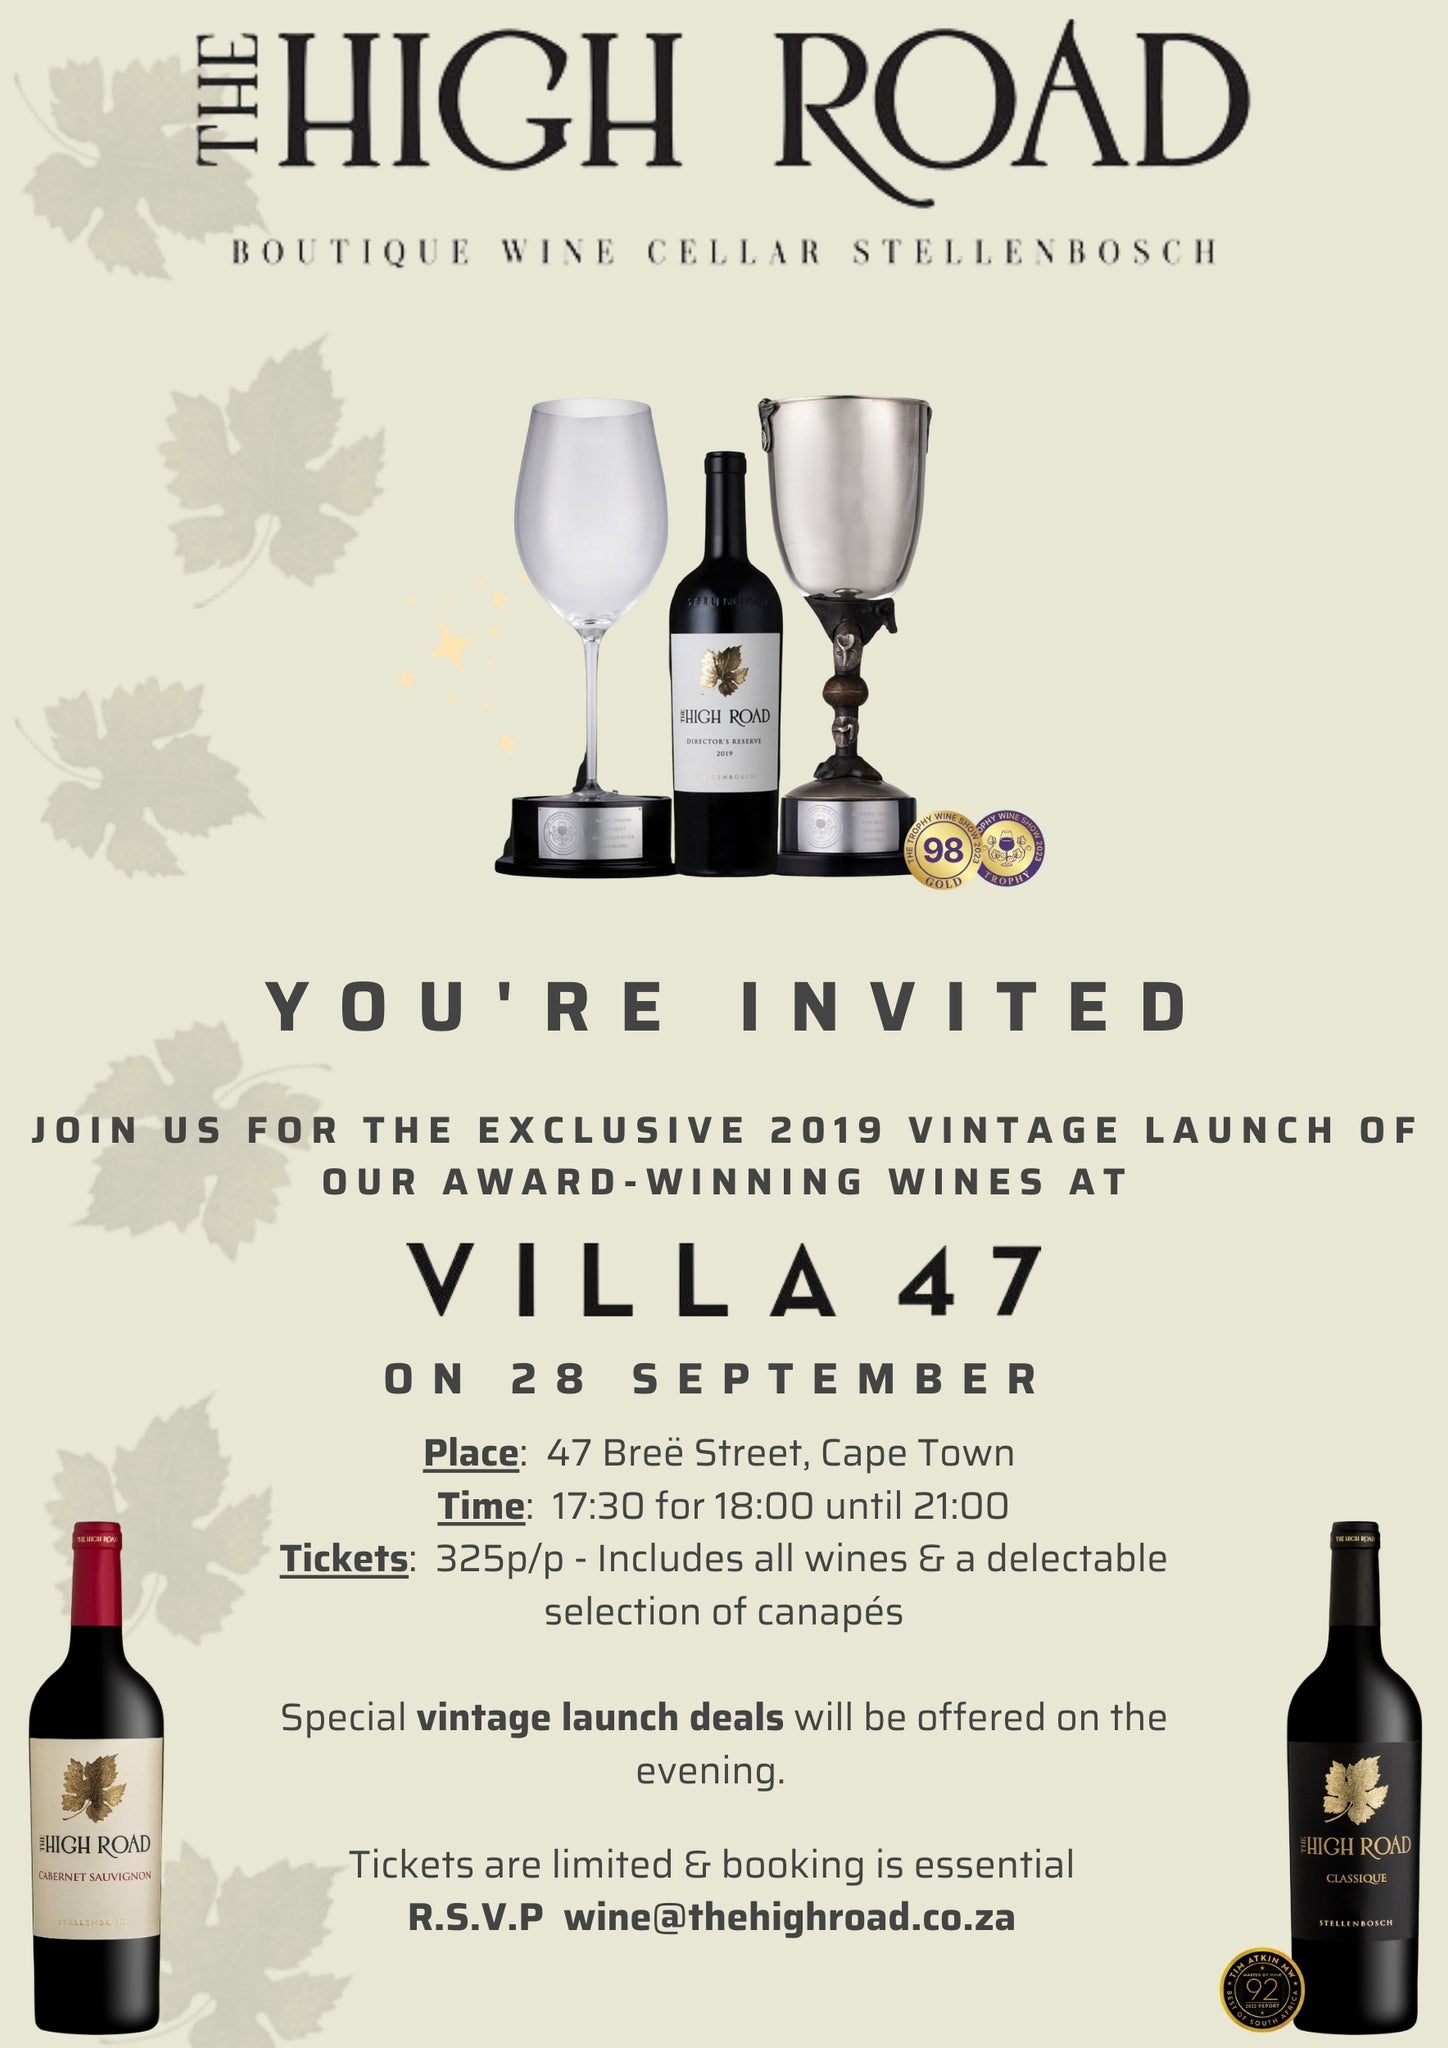 The High Road 2019 Vintage Launch in Cape Town - 28 September